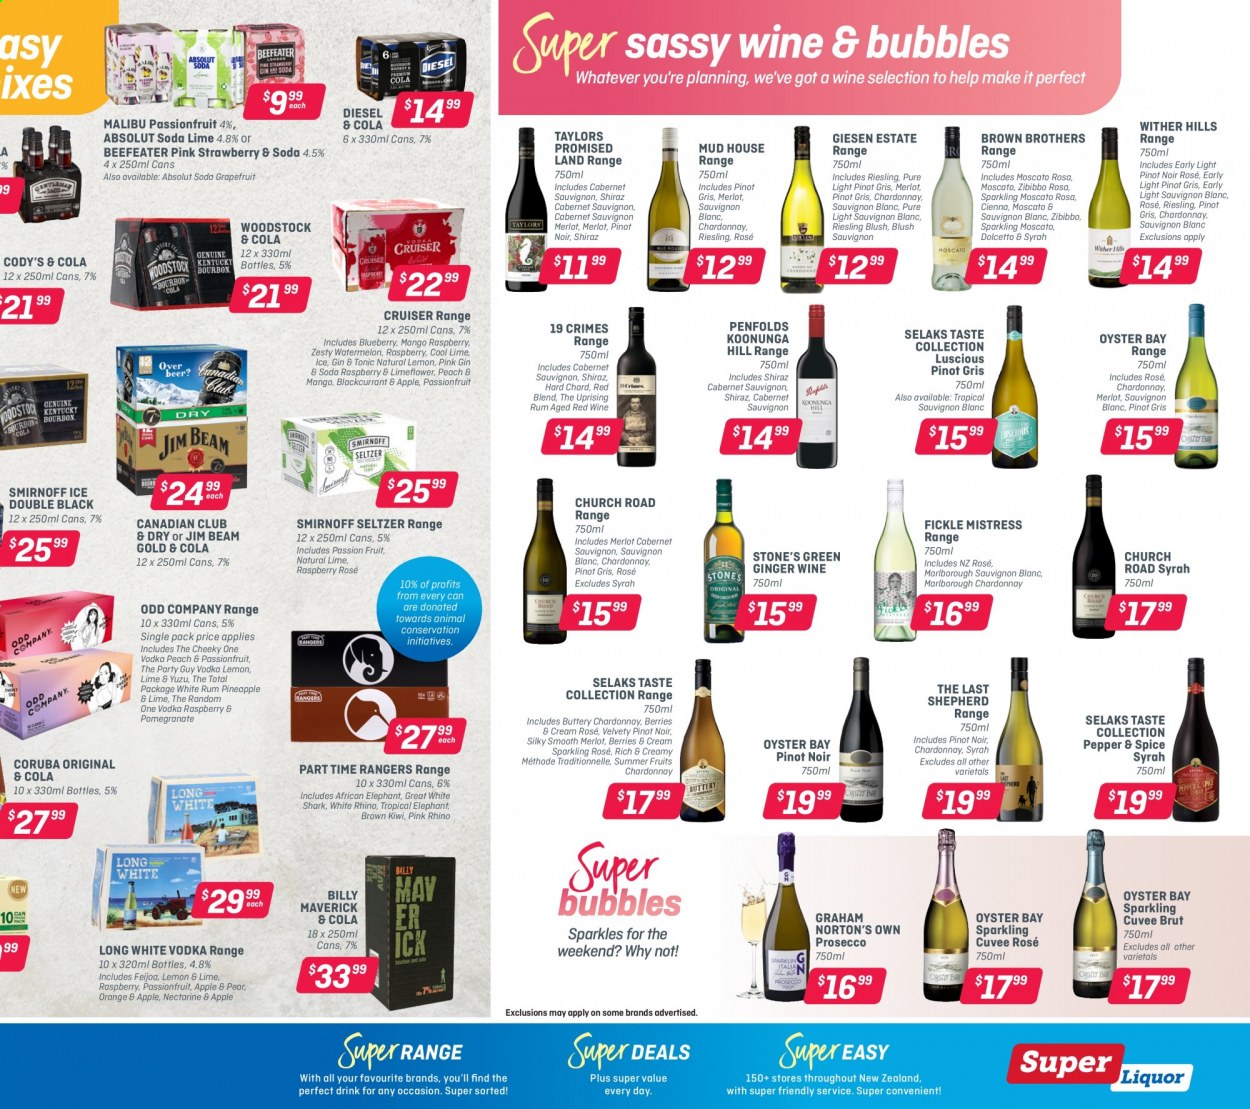 thumbnail - Super Liquor mailer - 05.07.2021 - 18.07.2021 - Sales products - Cabernet Sauvignon, red wine, Riesling, white wine, prosecco, Chardonnay, wine, Merlot, Pinot Noir, Cuvée, Wither Hills, Syrah, Moscato, Shiraz, Pinot Grigio, Sauvignon Blanc, rosé wine, rum, Smirnoff, vodka, Absolut, Beefeater, BROTHERS, Malibu, gin & tonic, Jim Beam, Hard Seltzer. Page 4.